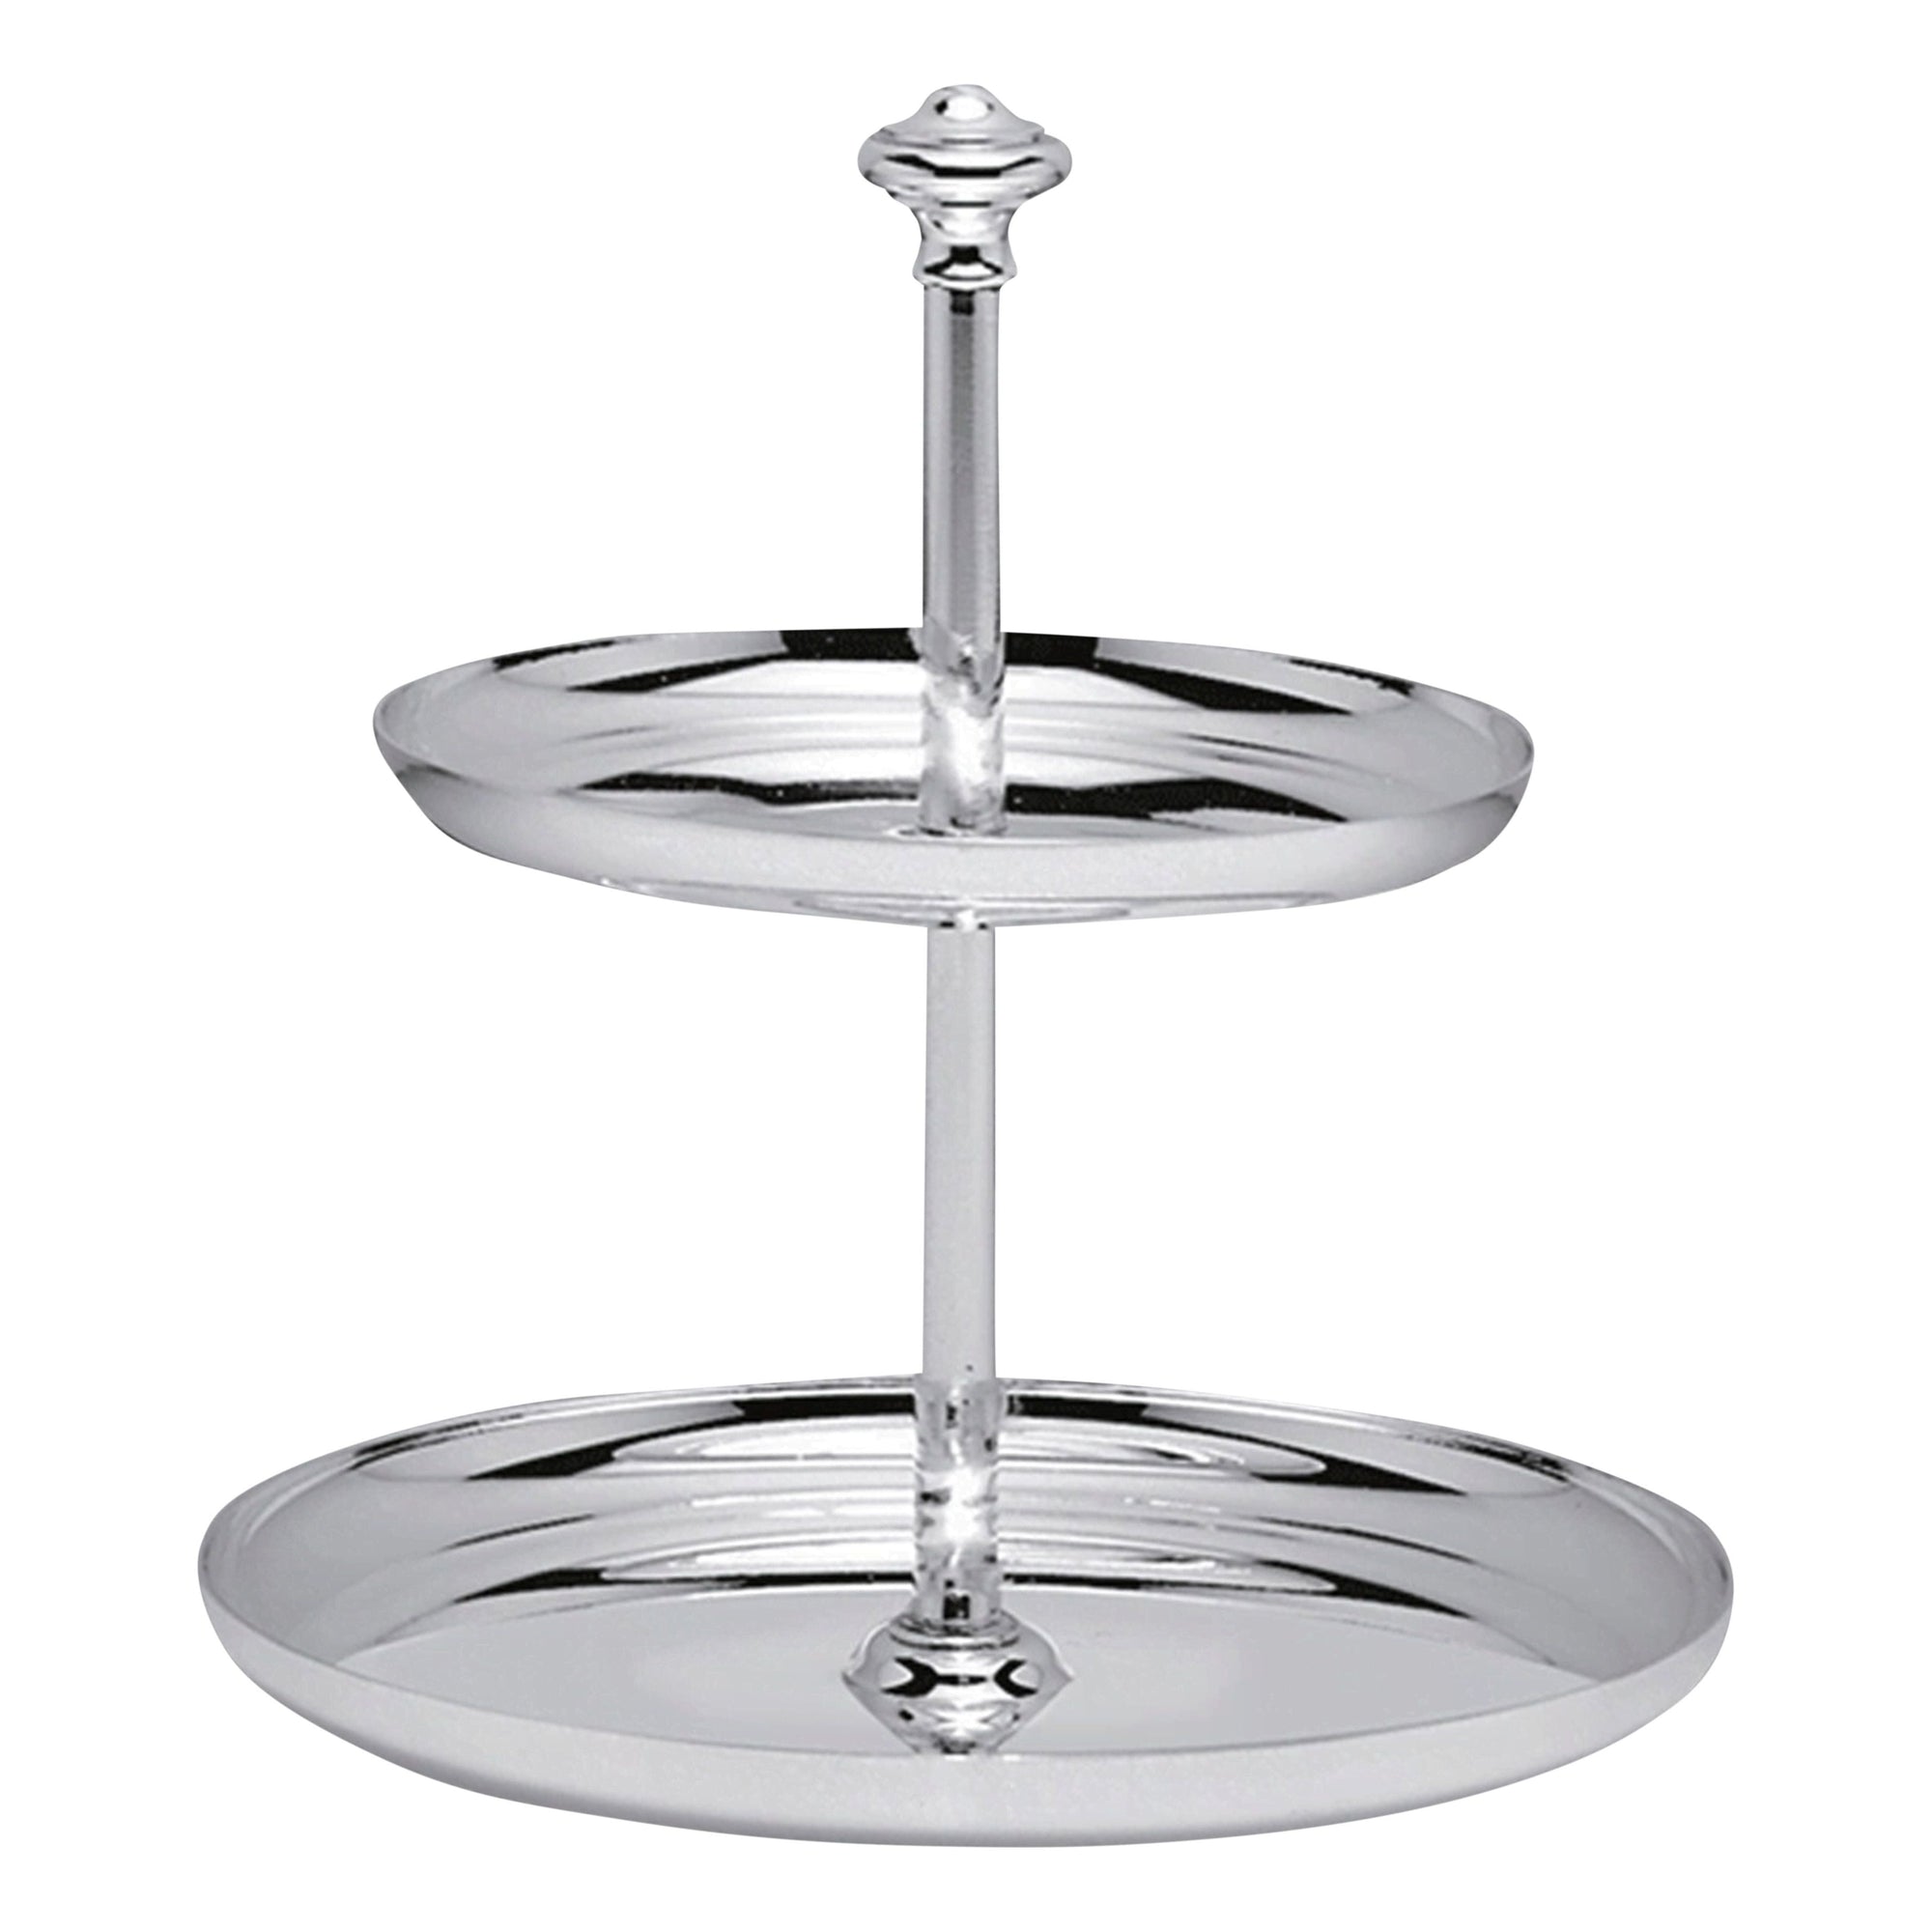 Christofle 2 Tier Albi Pastry Stand